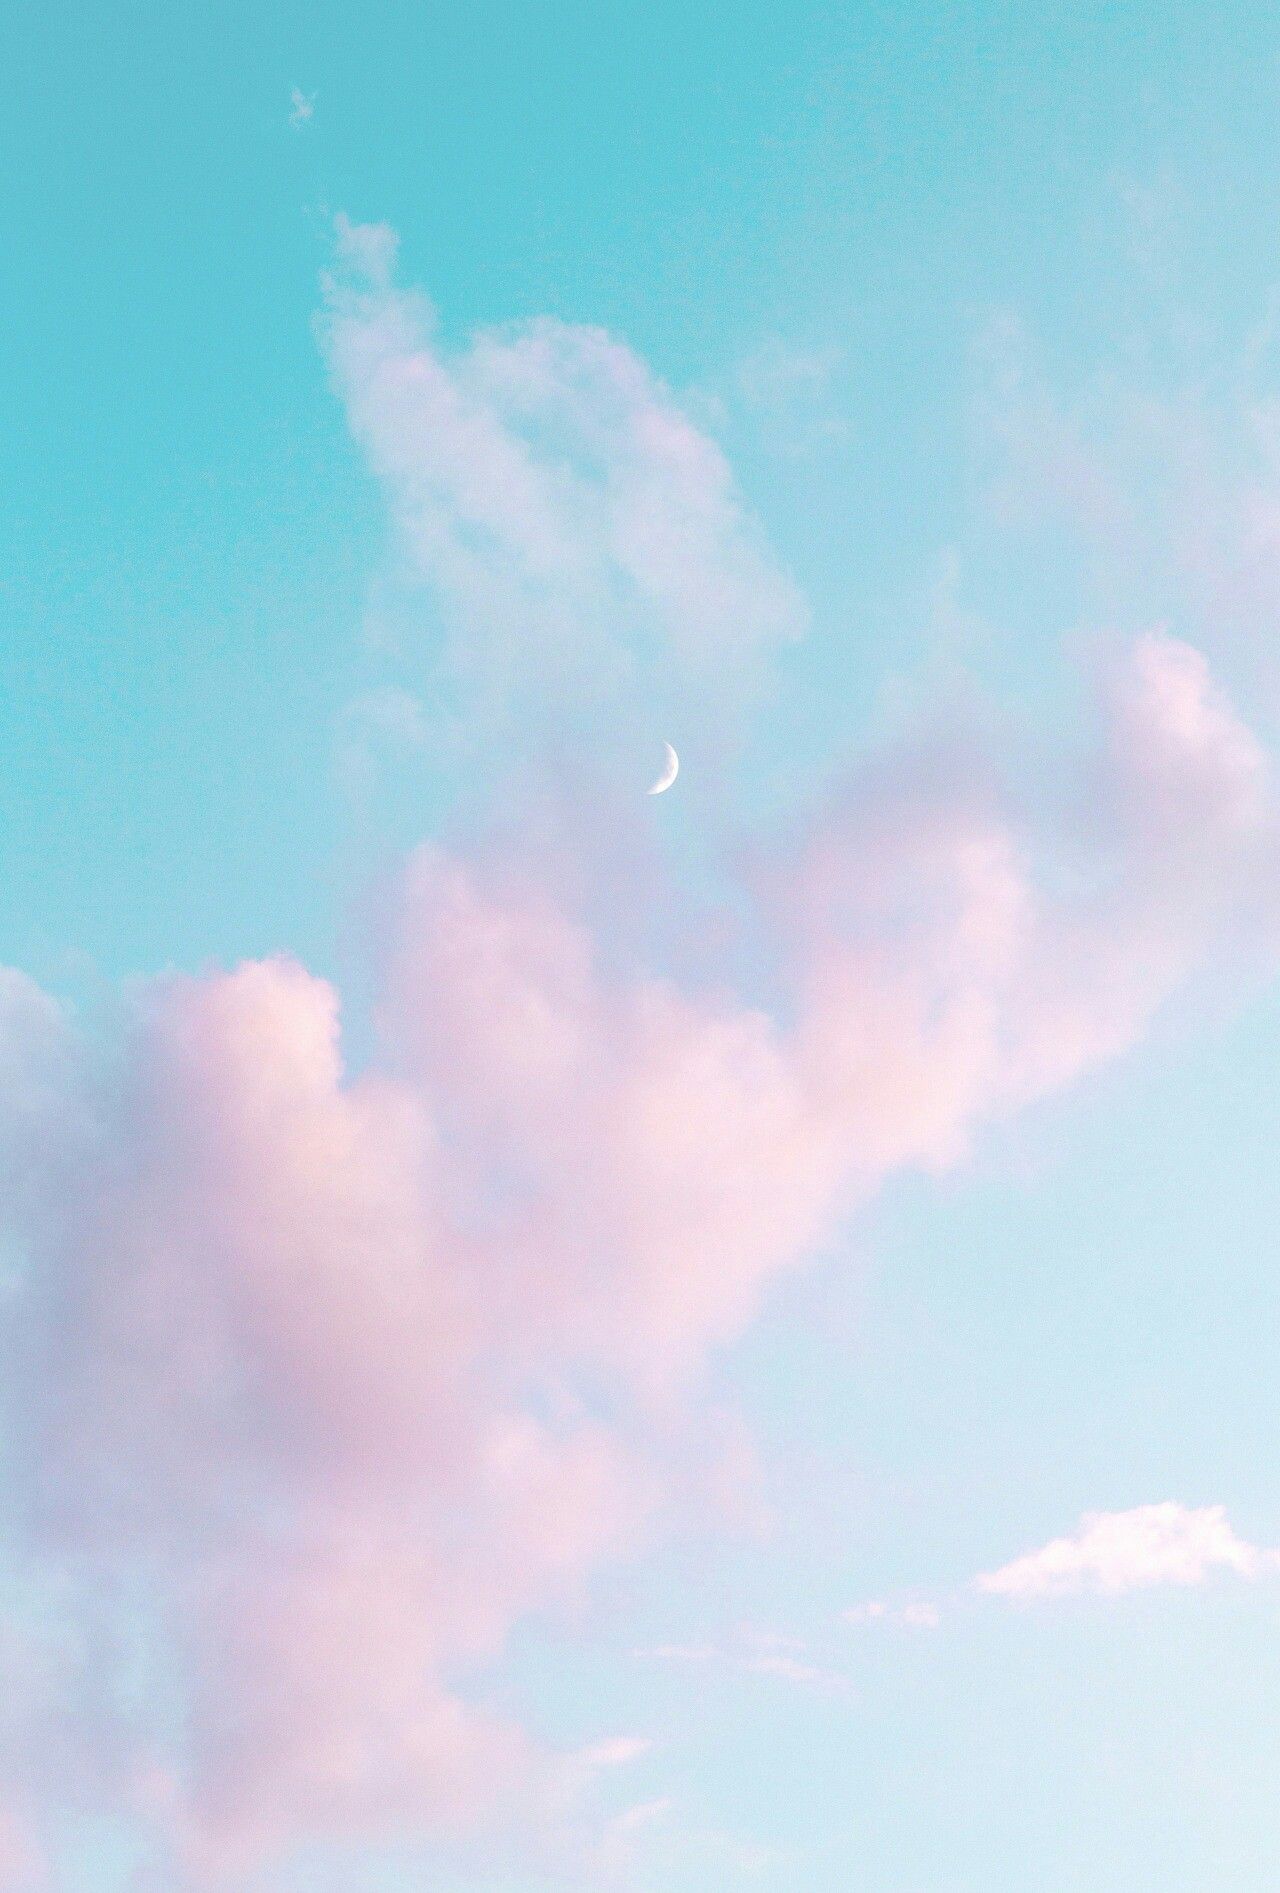 Pastel Pink And Blue Aesthetic - HD Wallpaper 